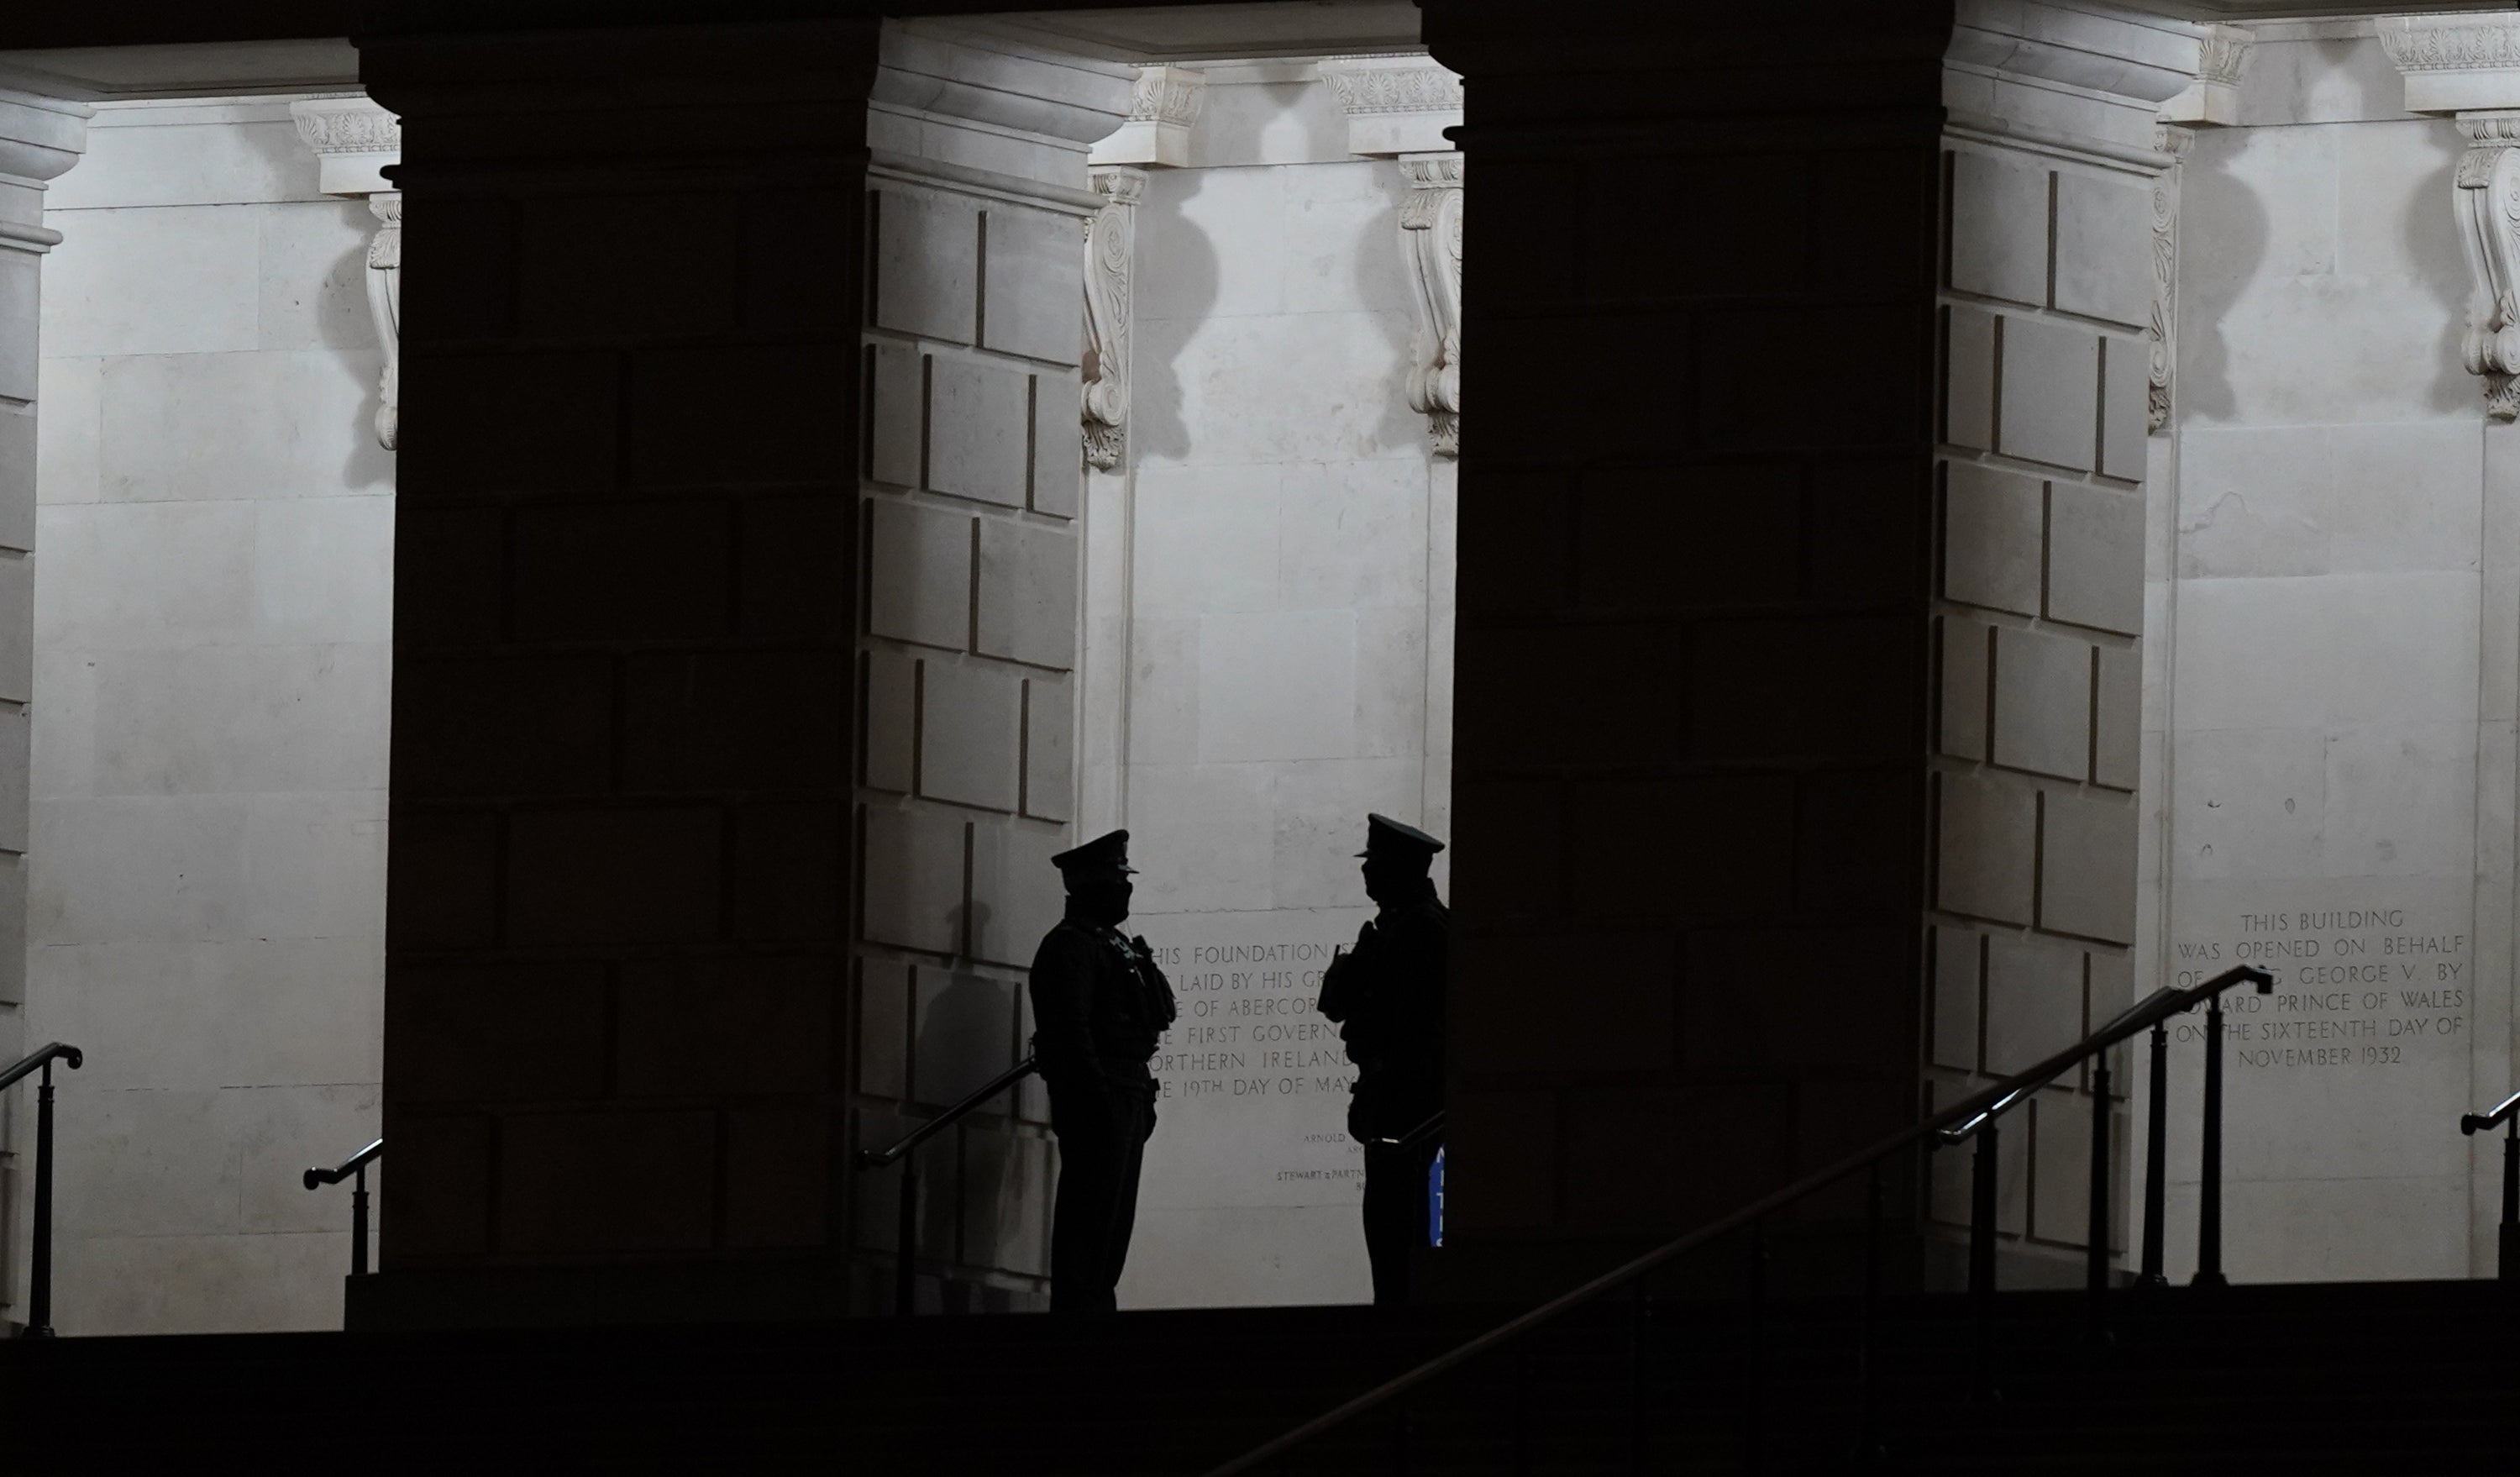 Two PSNI officers on duty outside the Stormont buildings in Belfast, Northern Ireland (PA)